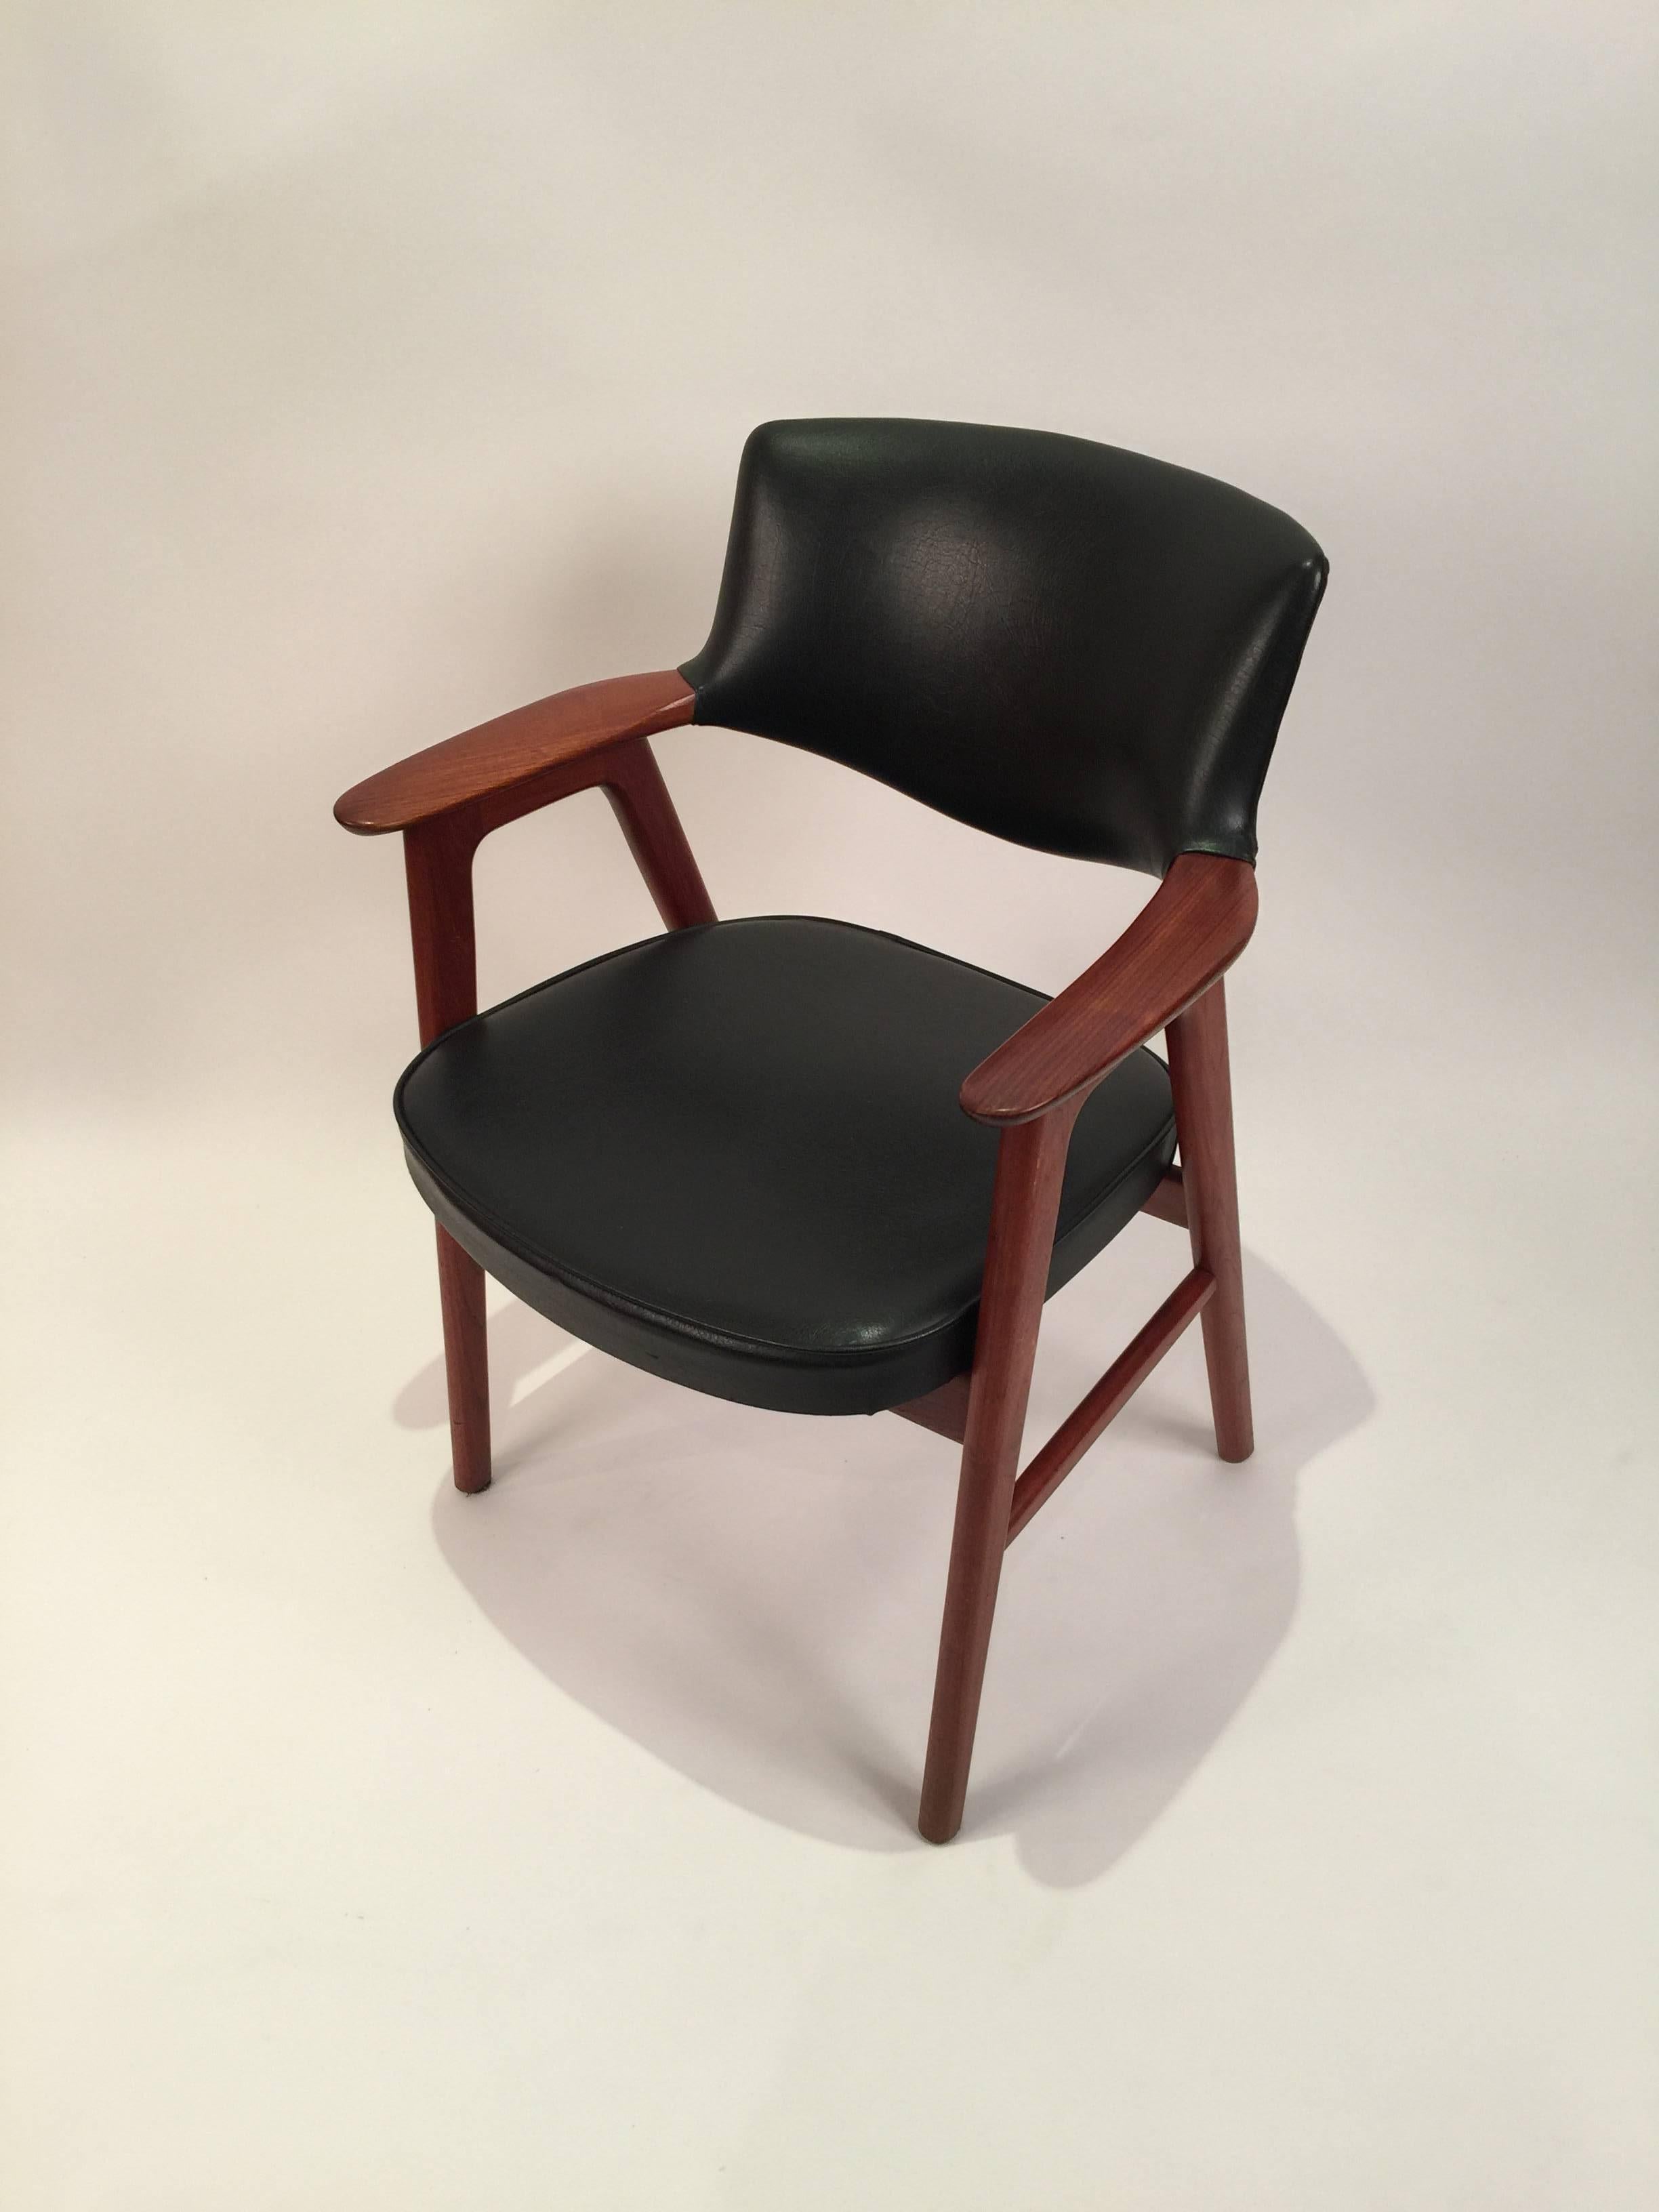 Erik Kirkegaard armchair produced by Høng Møbelfabrik in the 1960s. The chair features wide and long arms a supportive back and is constructed of rightly figured old growth teak wood and vinyl. Will make an excellent desk or reading chair.
 